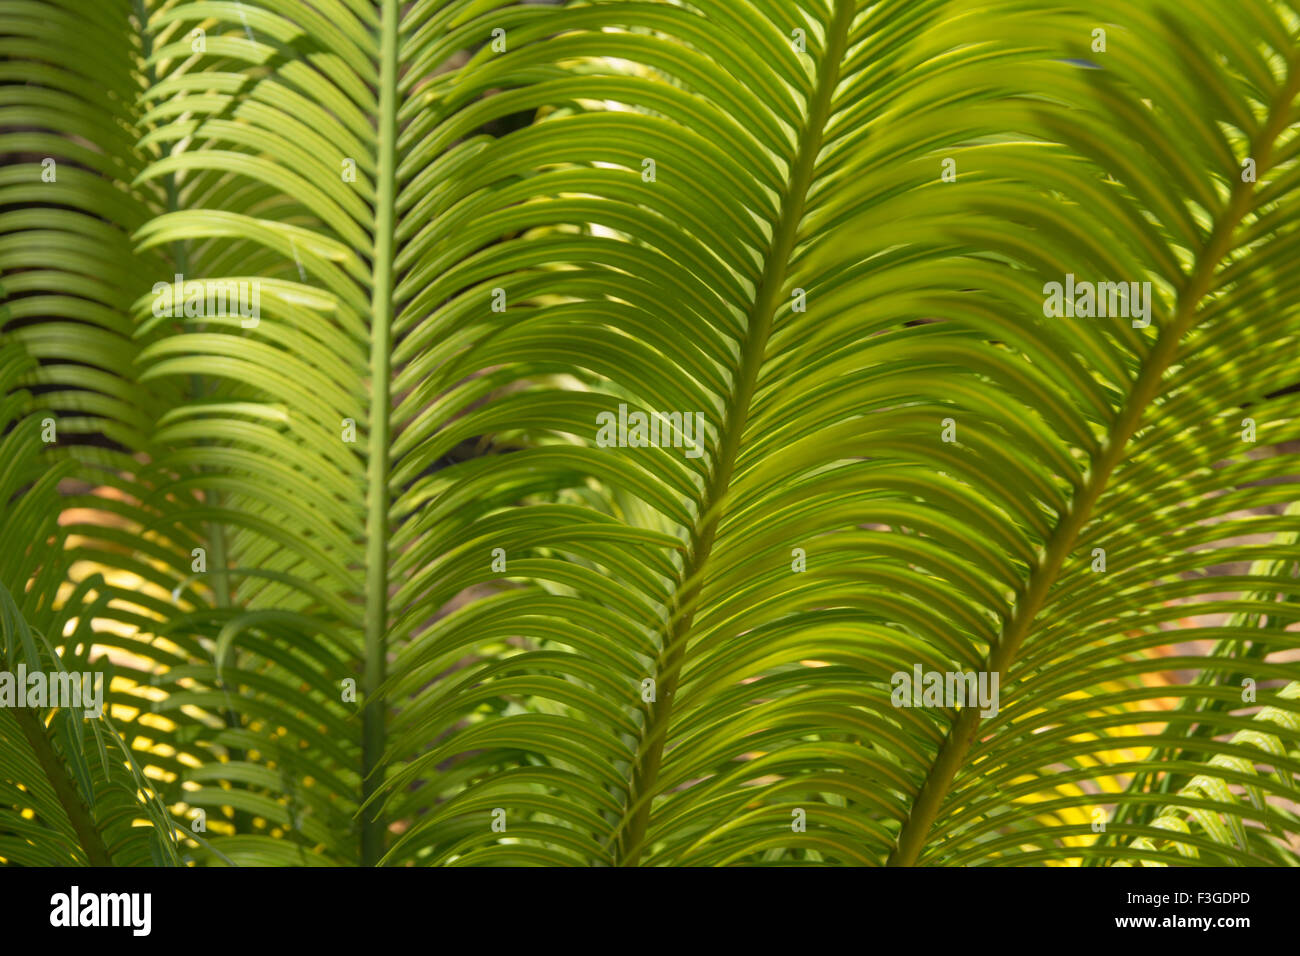 cycas plant natural floral abstract background Stock Photo